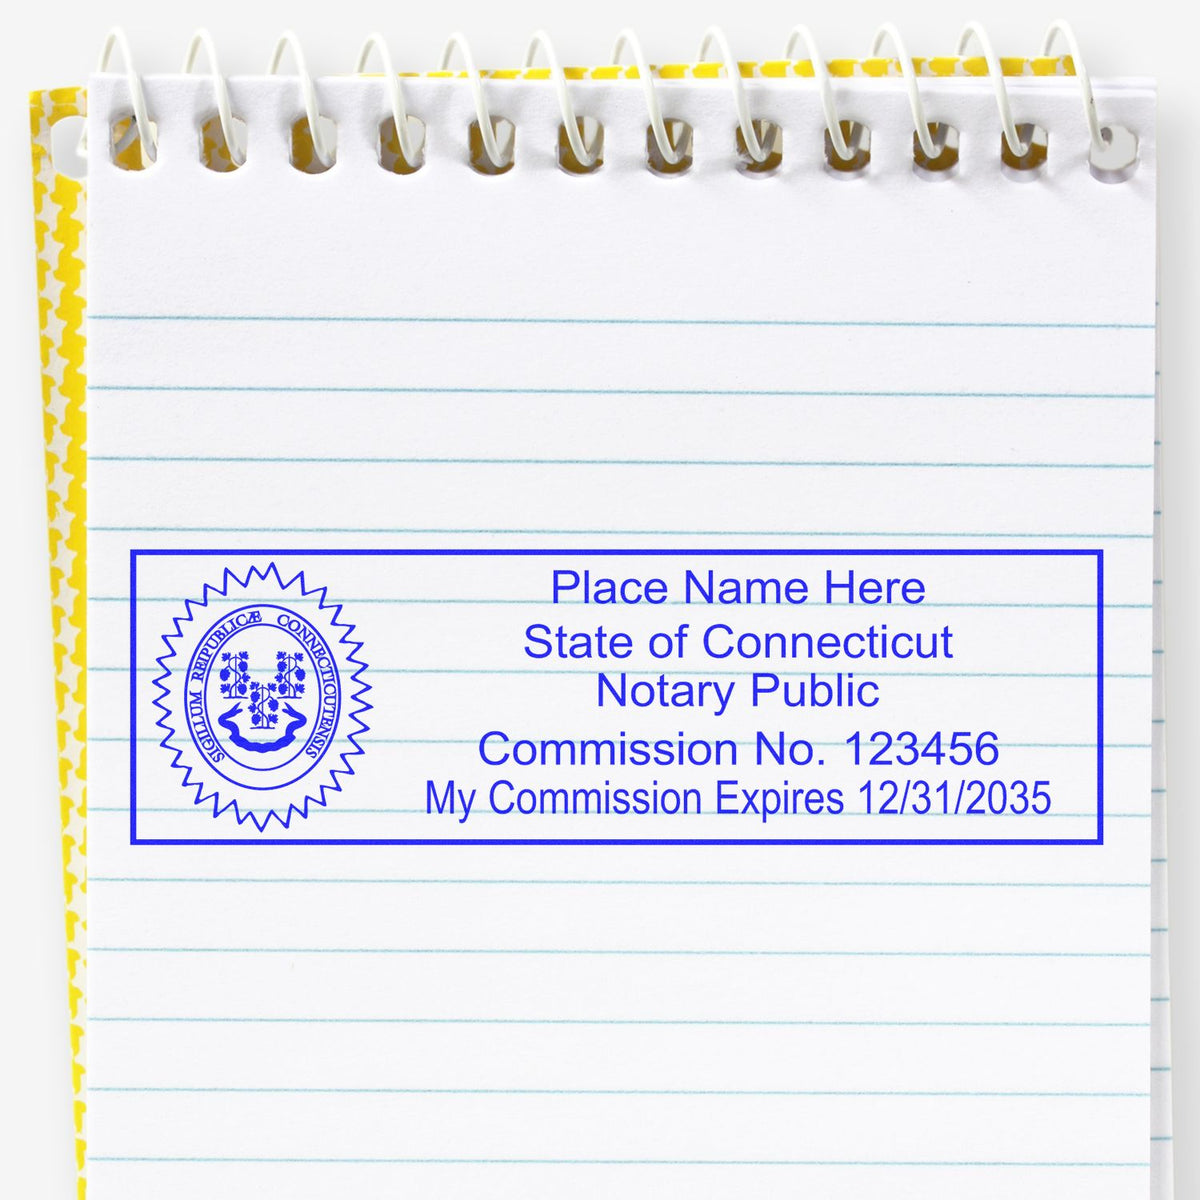 A stamped impression of the Super Slim Connecticut Notary Public Stamp in this stylish lifestyle photo, setting the tone for a unique and personalized product.